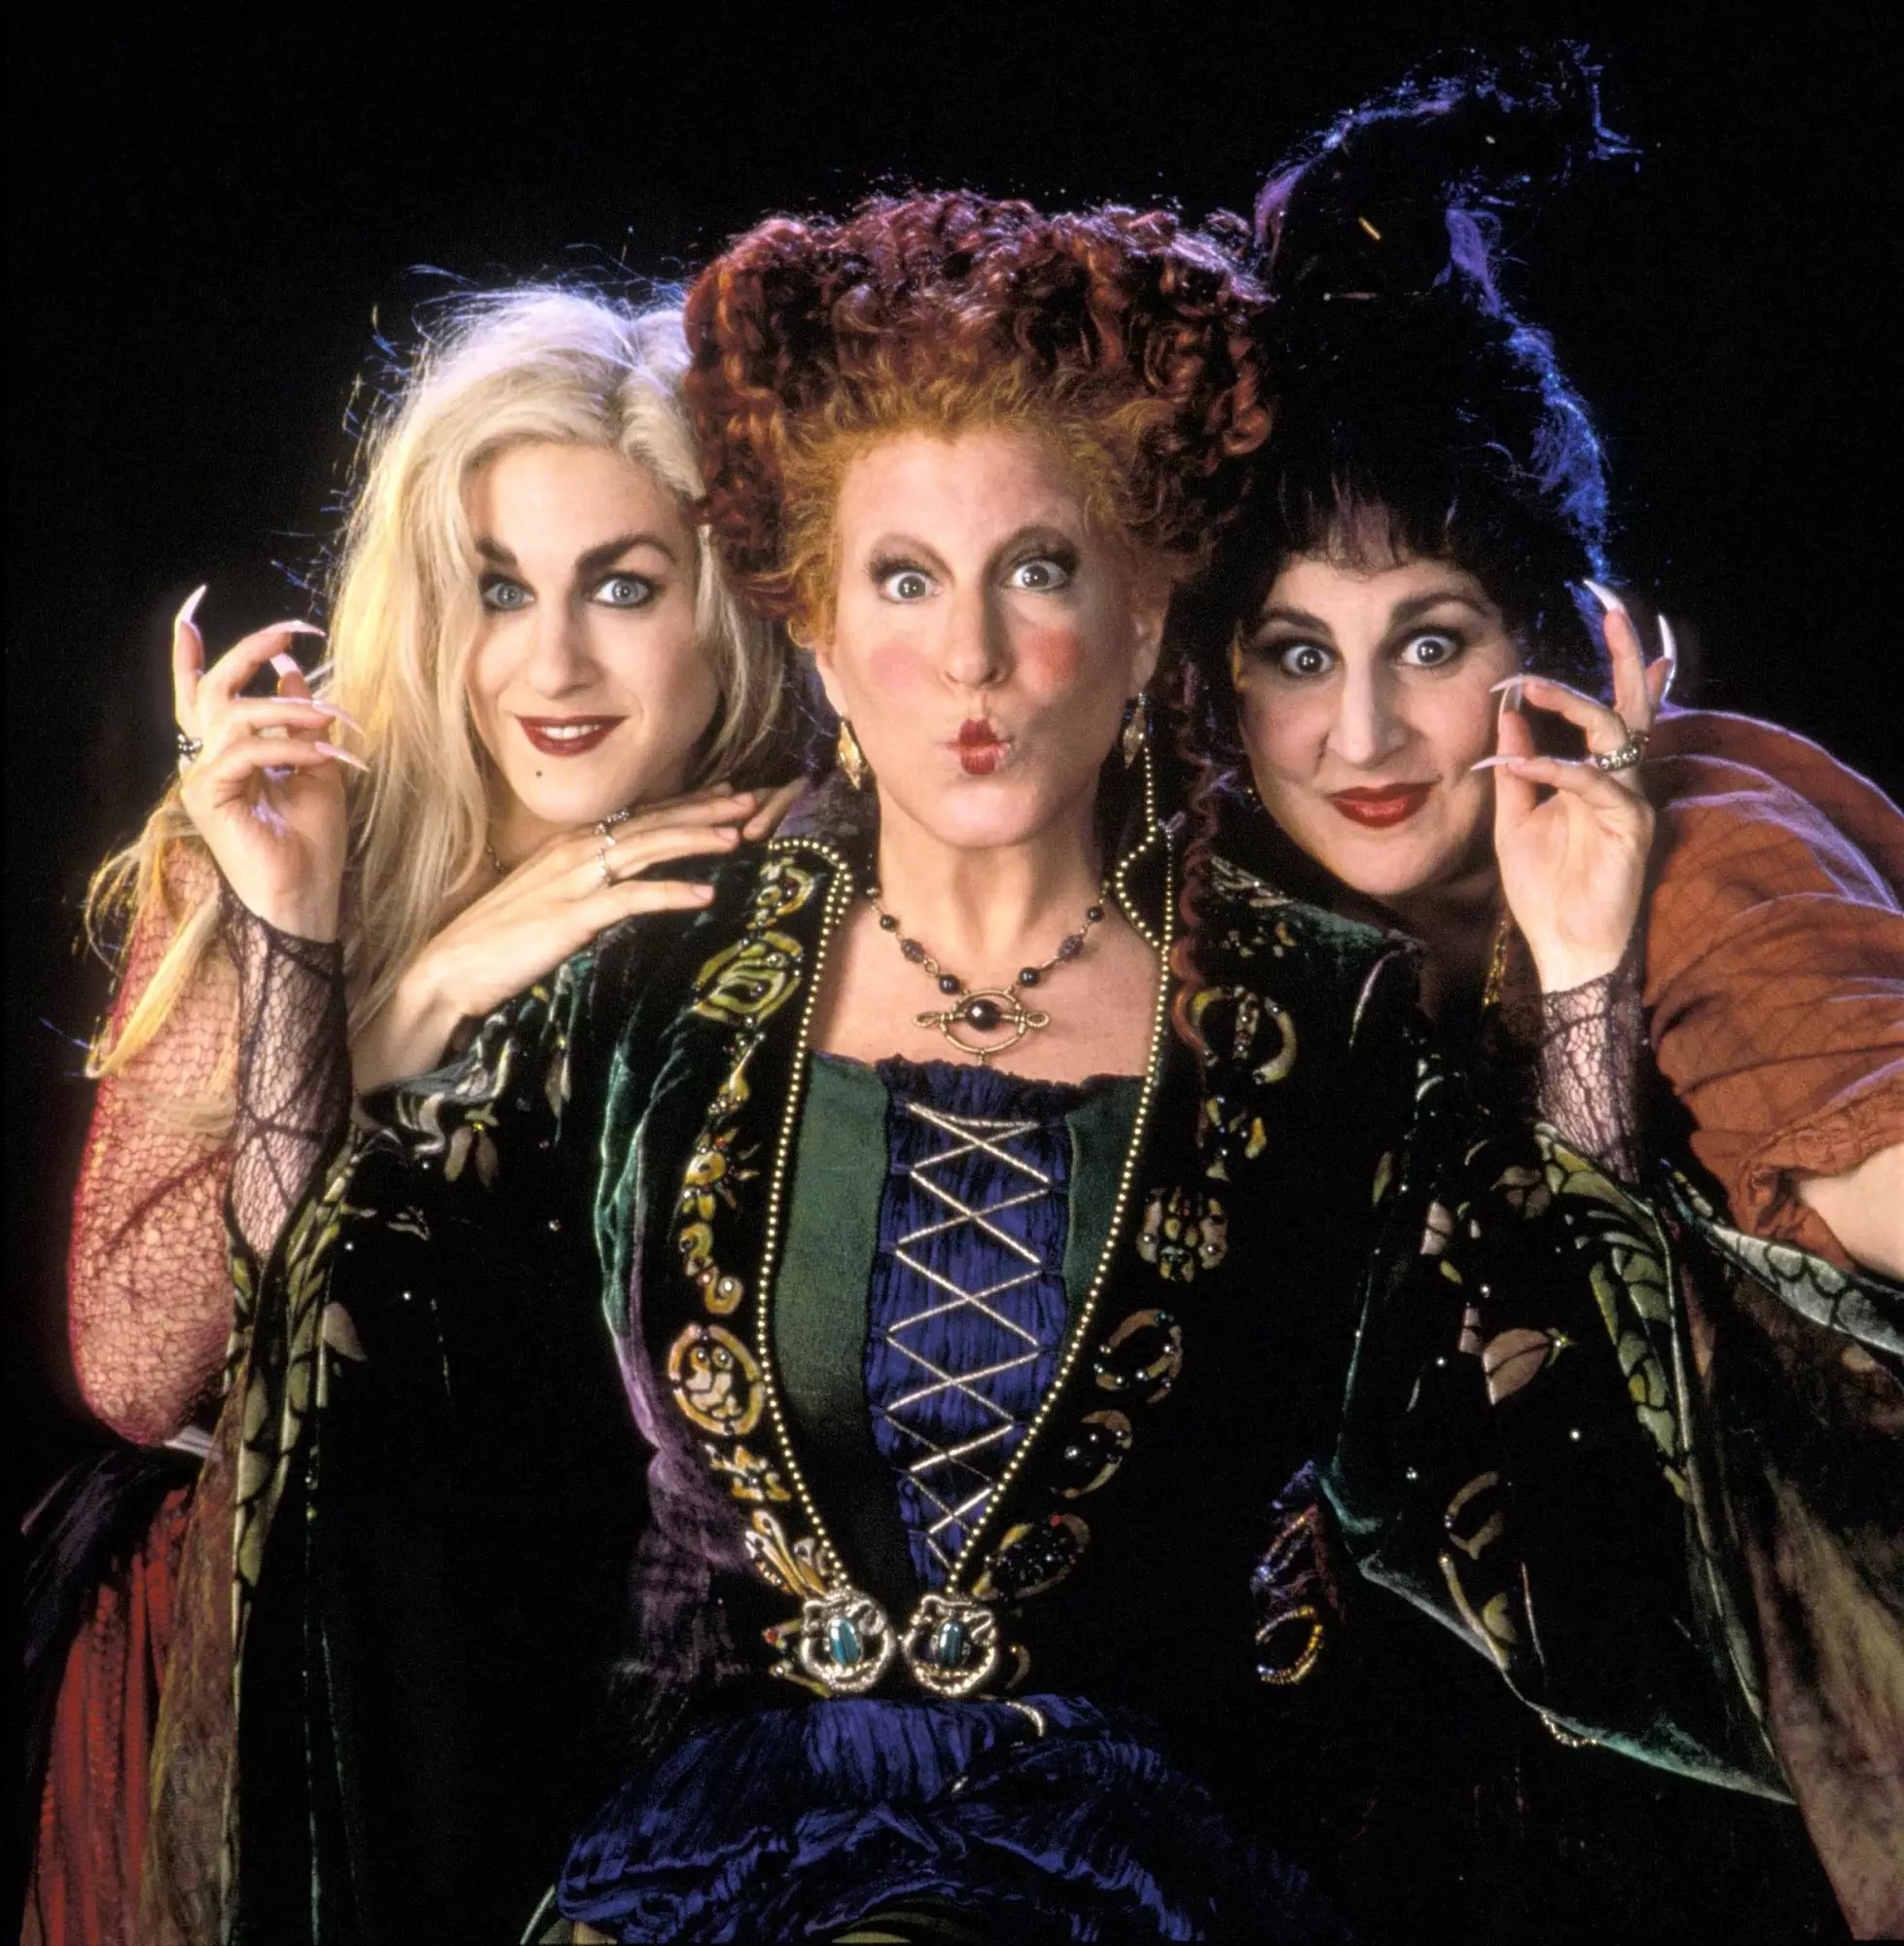 There will be a 'Hocus Pocus' reunion (